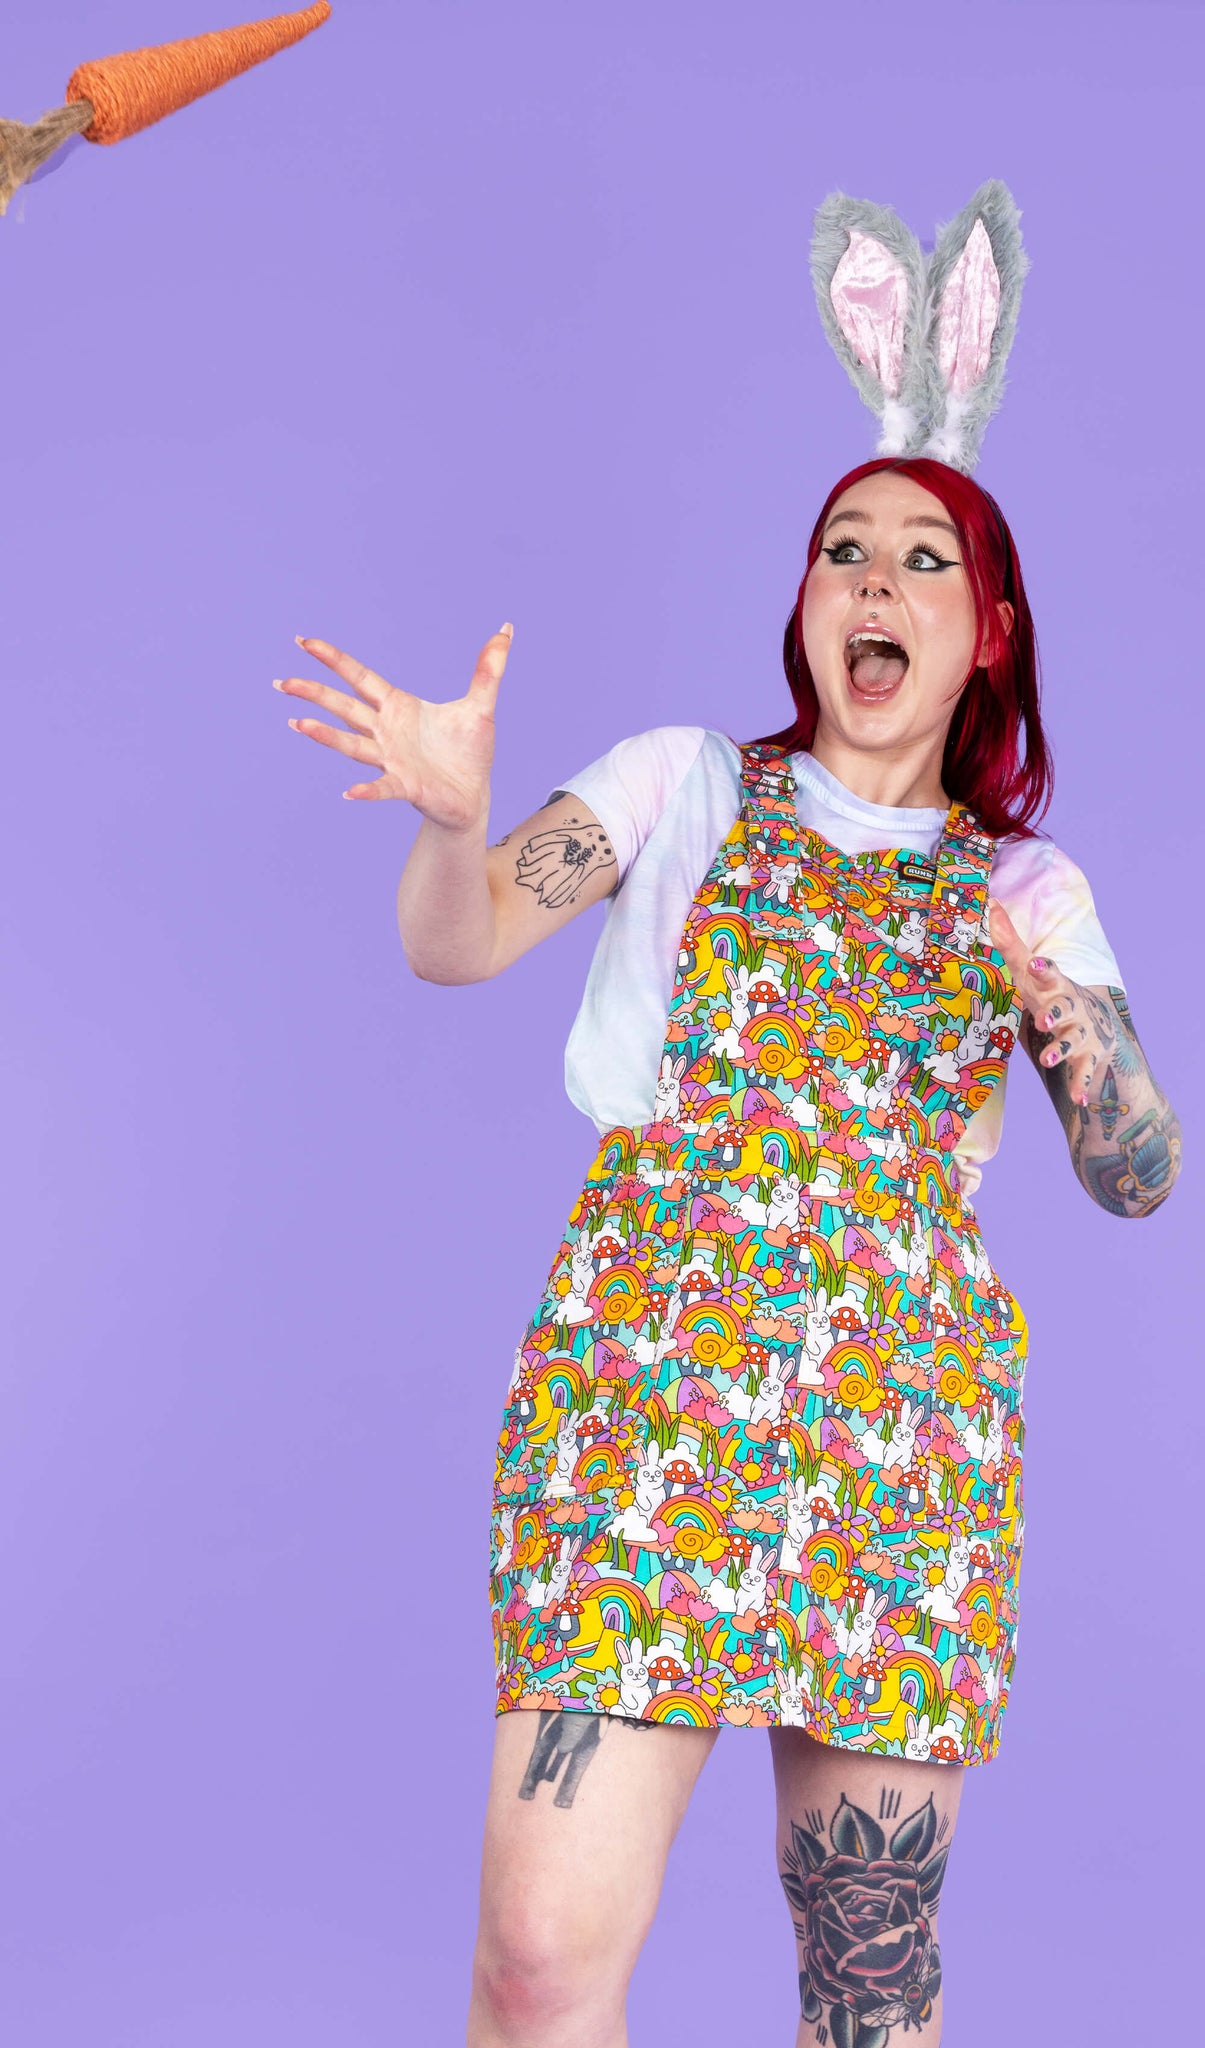 Flo modelling the some bunny loves you stretch twill pinafore by Run and Fly, the print features rainbows, bunnies, mushrooms and smiling snails all over. She is stood facing forward on a purple background with a shocked expression as a prop carrot flies towards her.